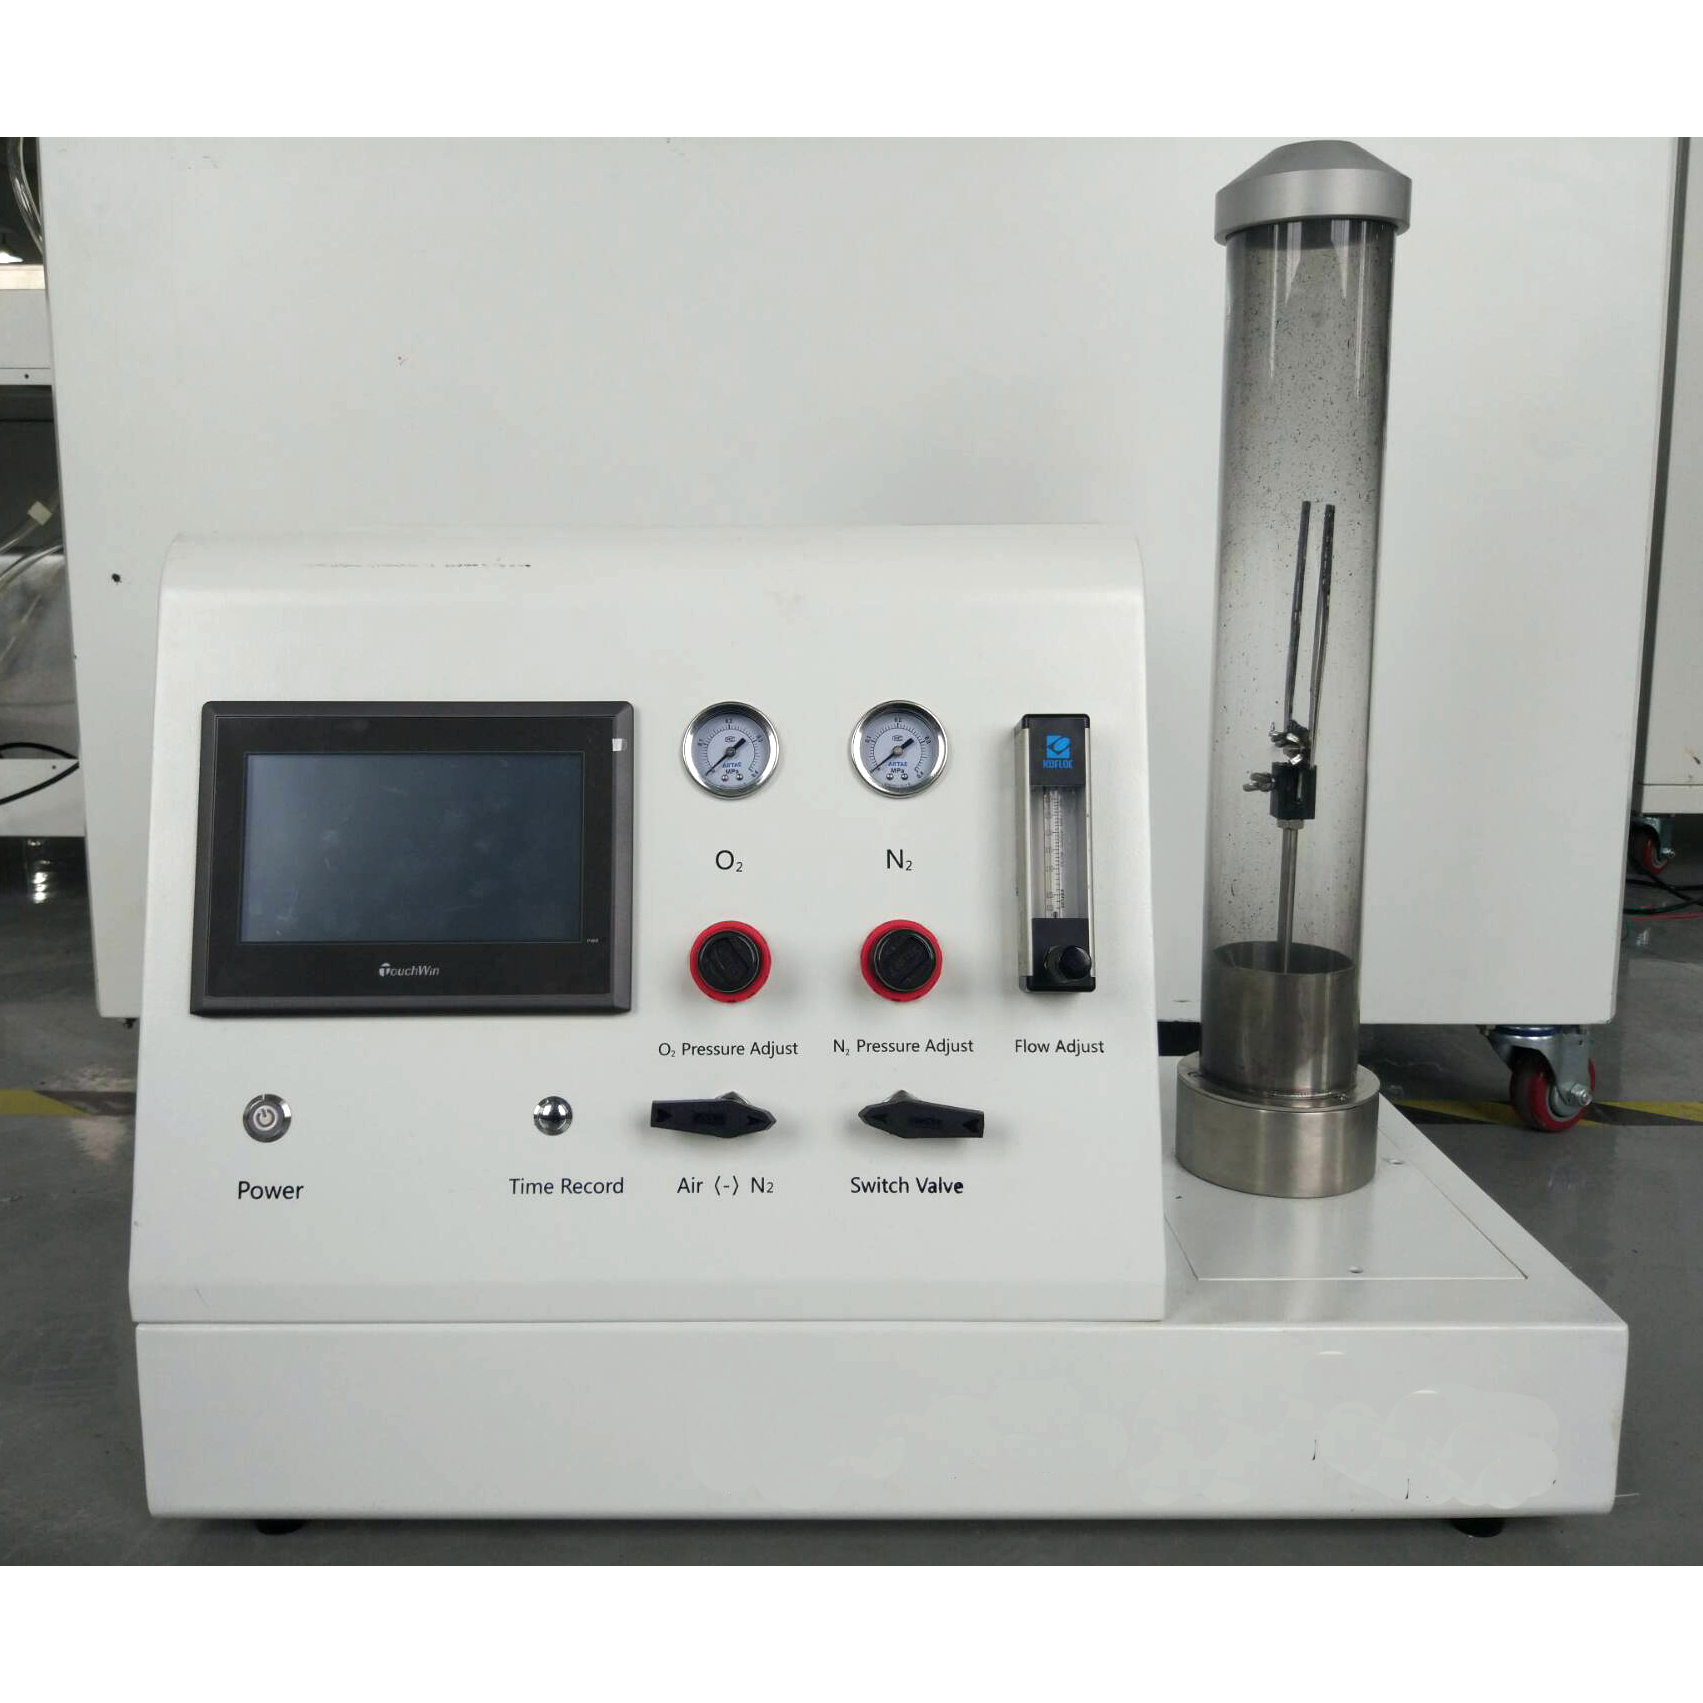 ISO 4589-2 Limited/ Limiting Oxygen Index Tester, ISO 4589-3 Elevatd-Temperature Oxygen Index Tester